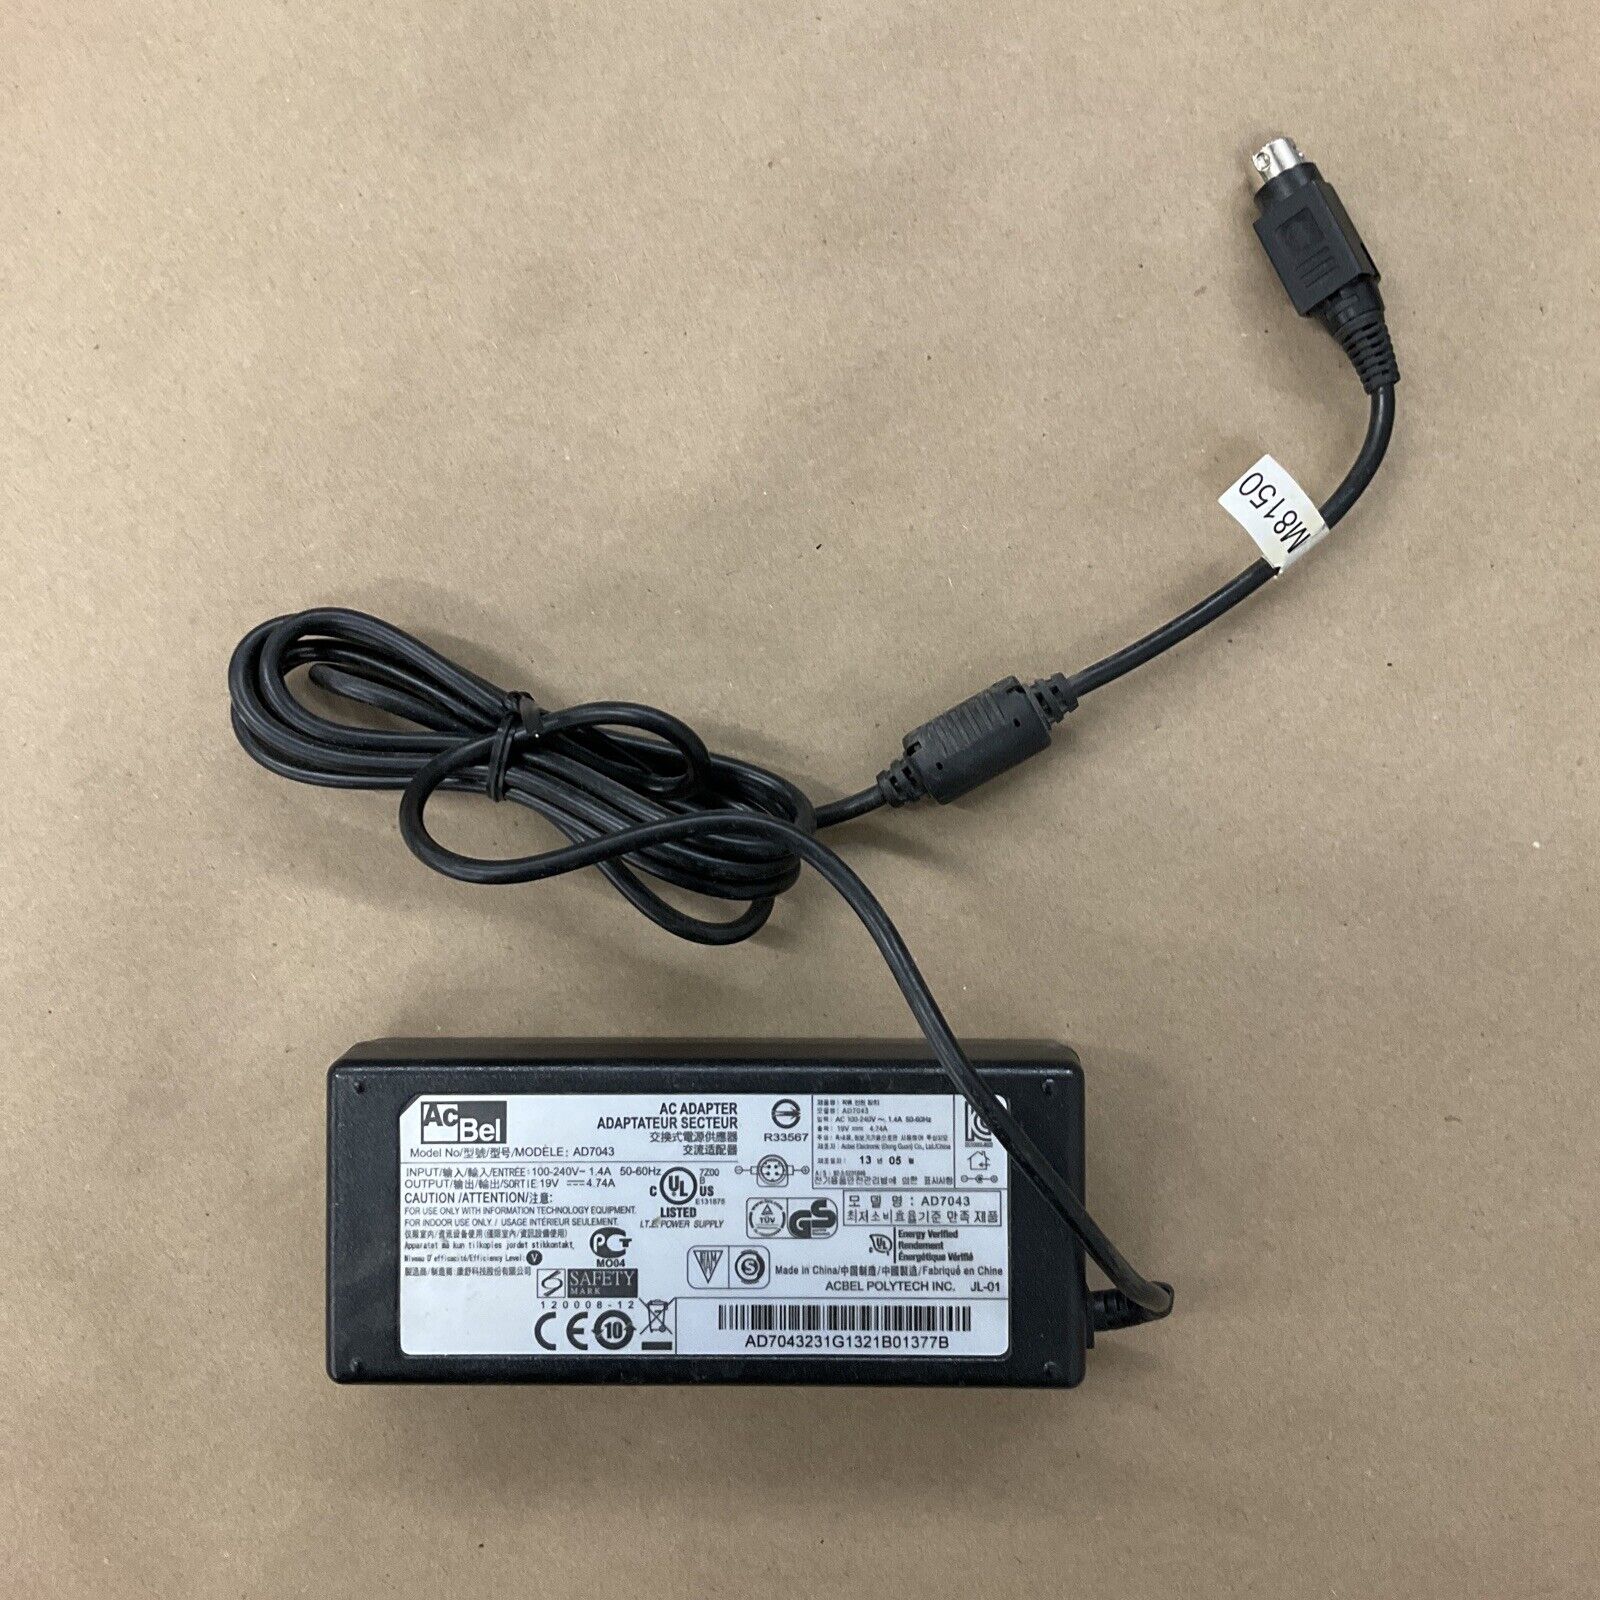 AC/DC Adapter Charger Battery lead PSU for AcBel AD7043 I.T.E. Power Supply Cord Brand AcBel Type AC/DC Adapter Feature